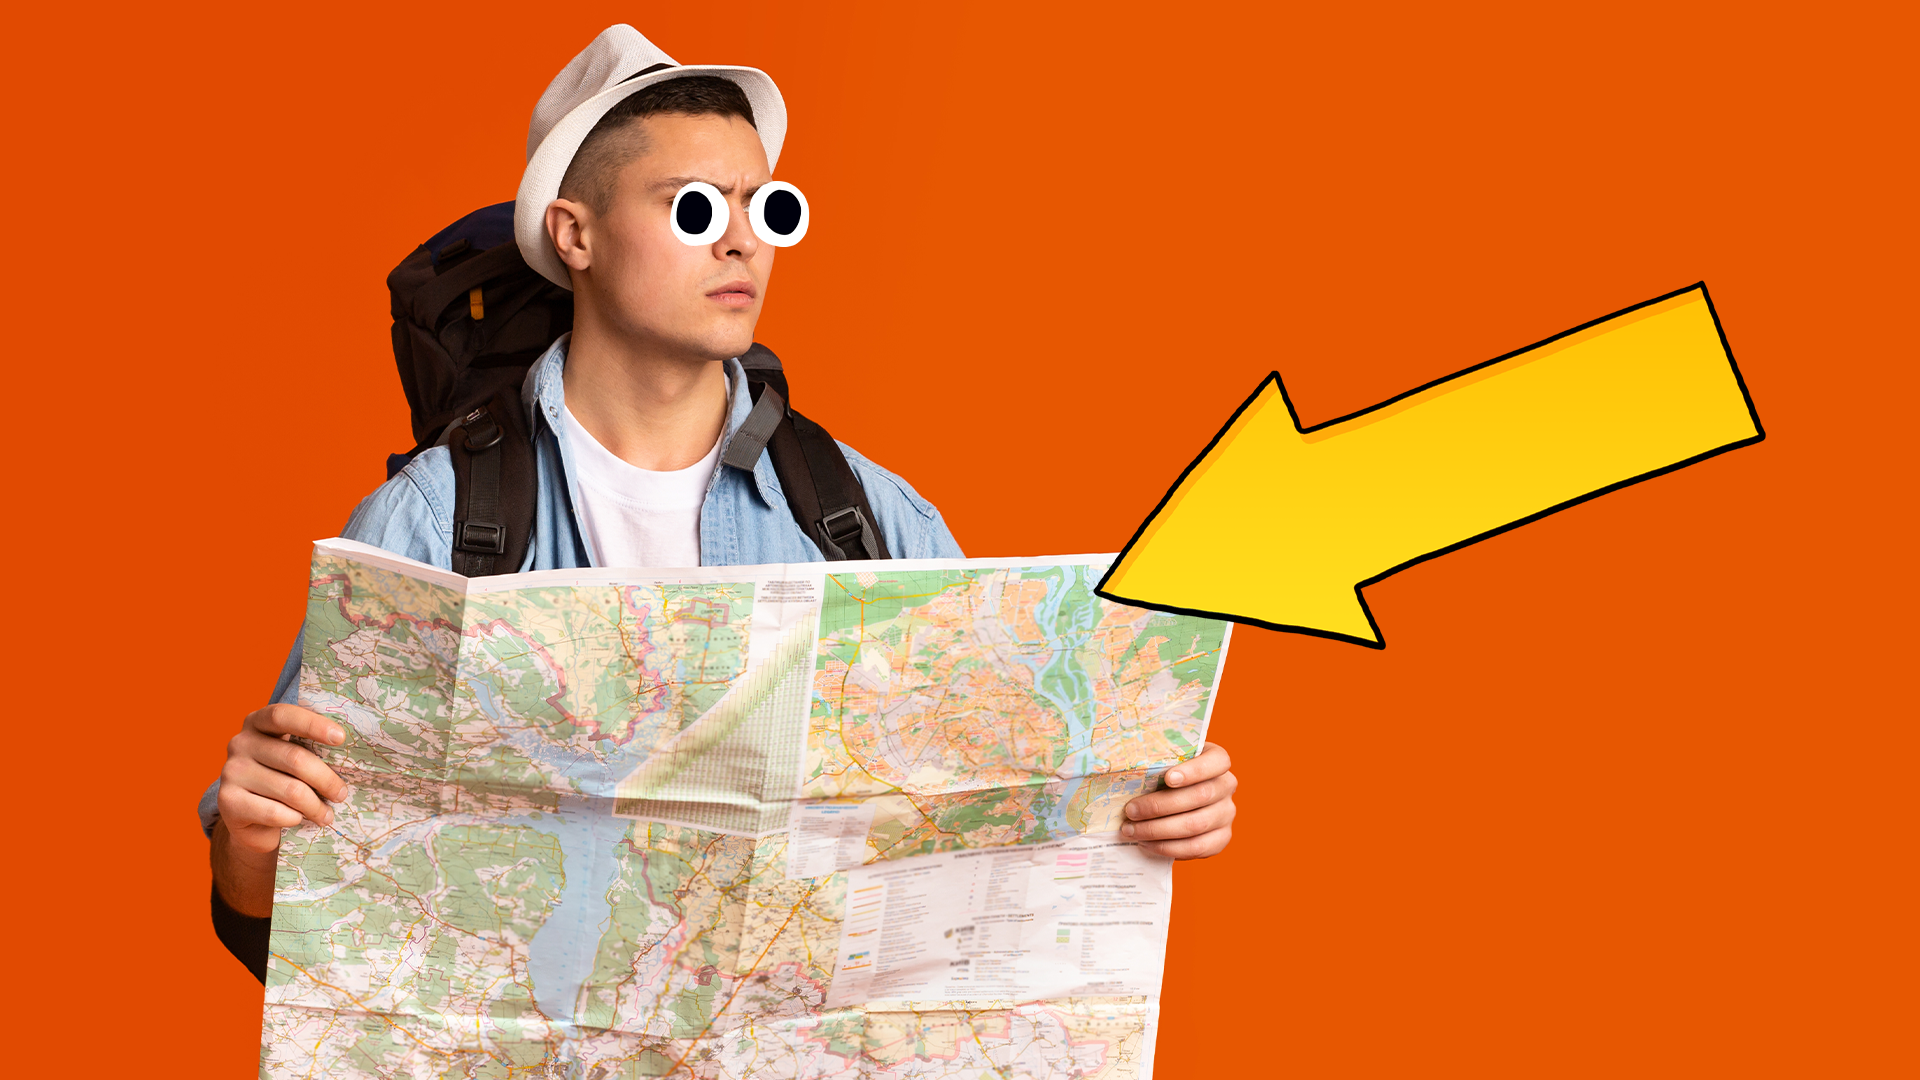 Man looking at map on orange background with arrow